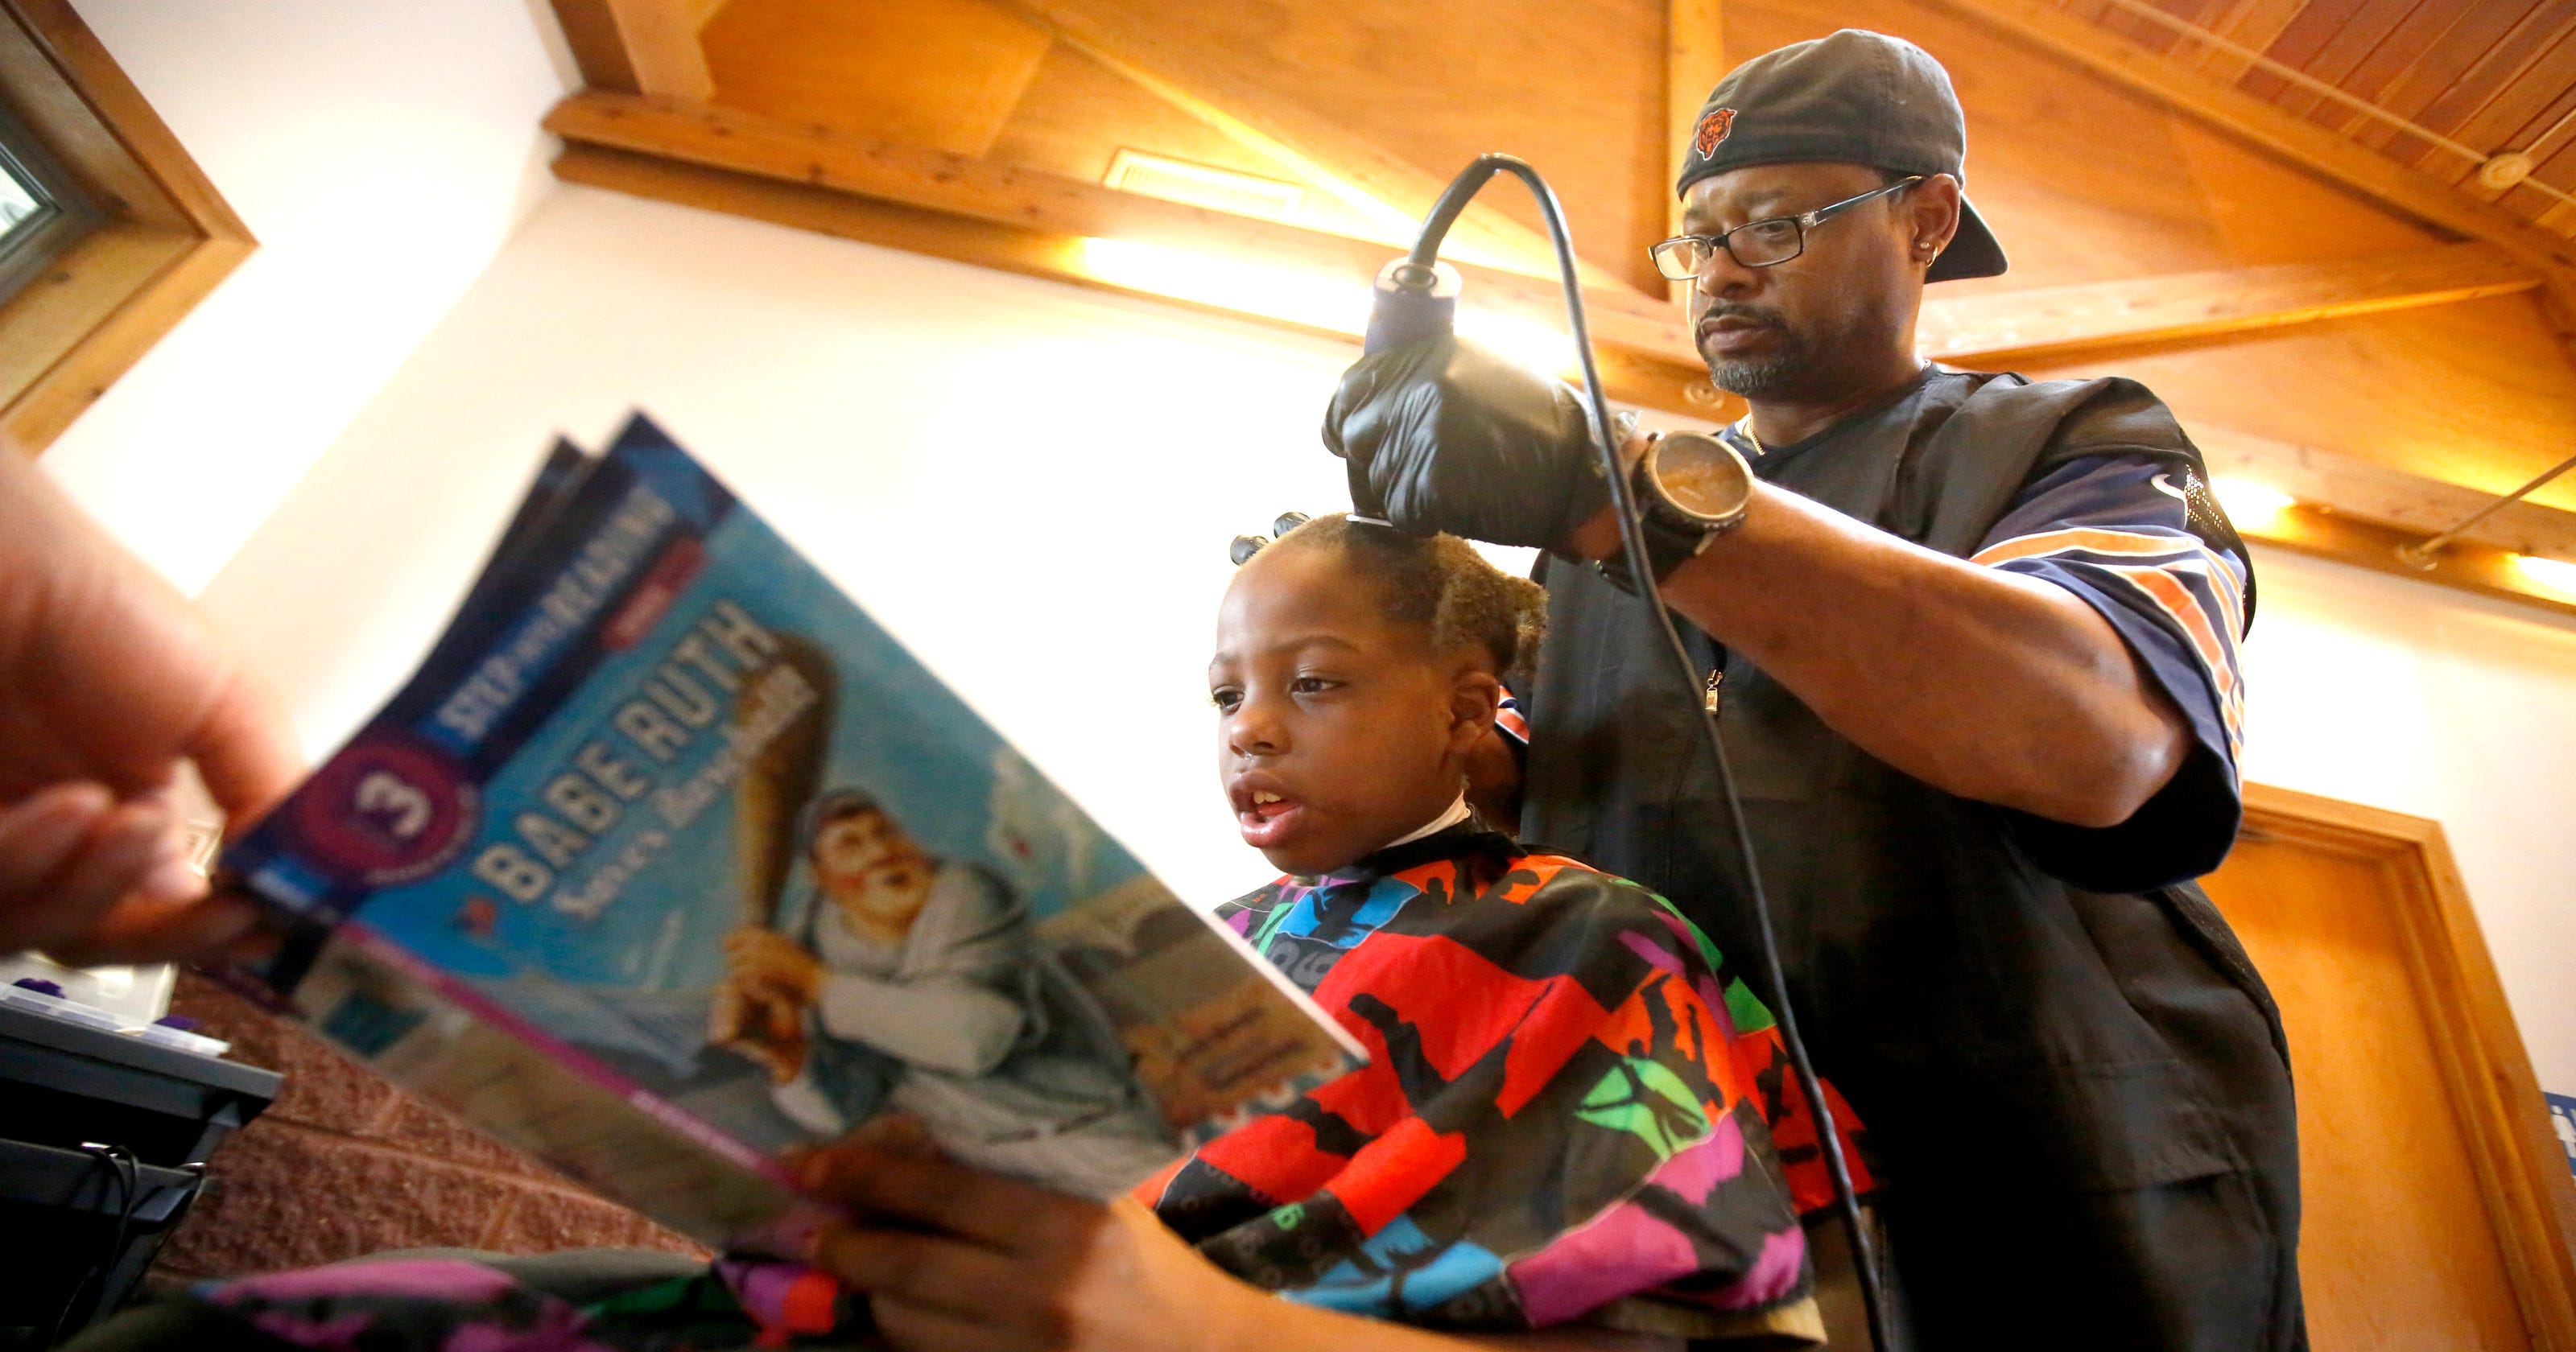 Dubuque Barber Gets Kids Reading With Free Haircuts